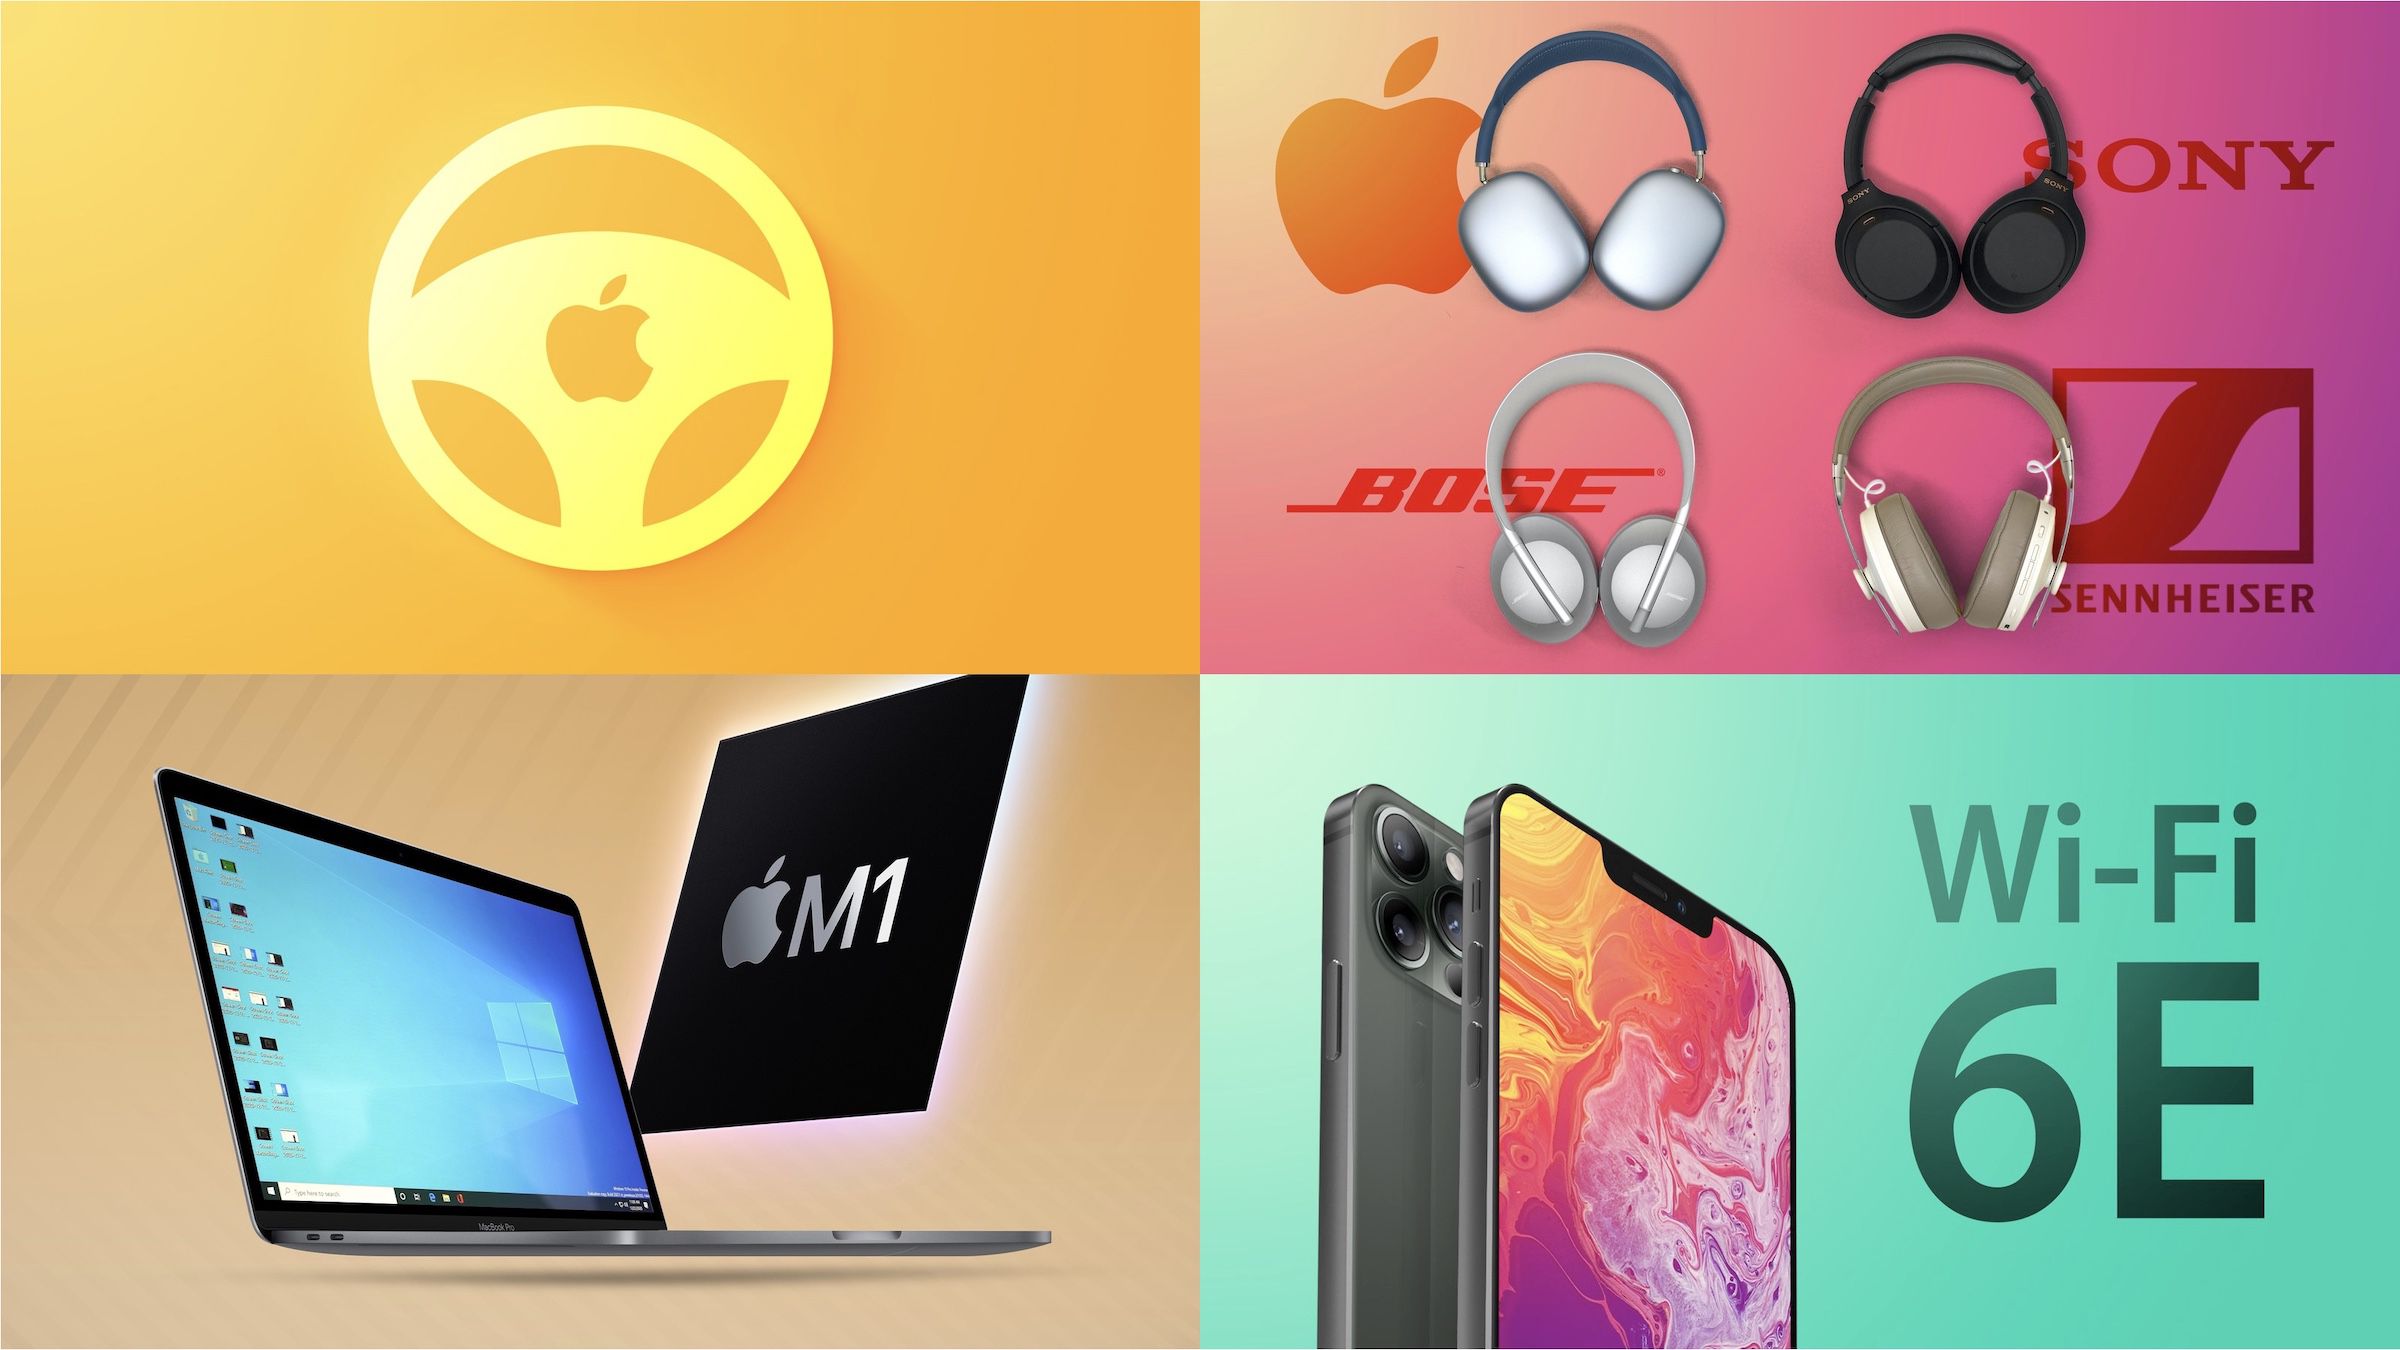 Top stories: rumors about Apple cars, Windows on a Mac M1, AirPods Max compared